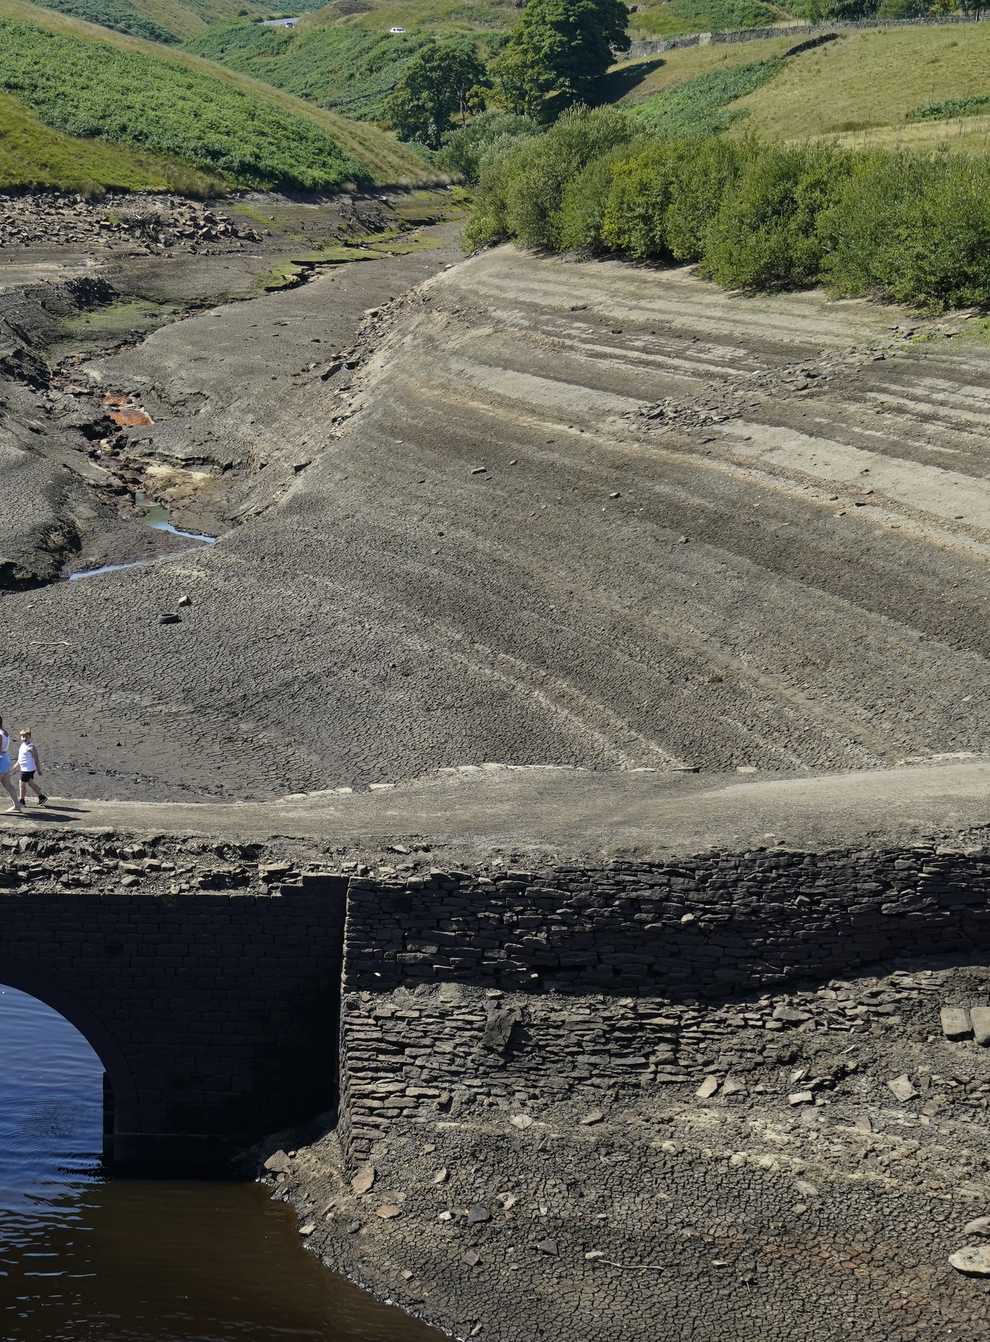 People walk across a previously submerged bridge at Baitings reservoir in Ripponden, West Yorkshire (Danny Lawson/PA)